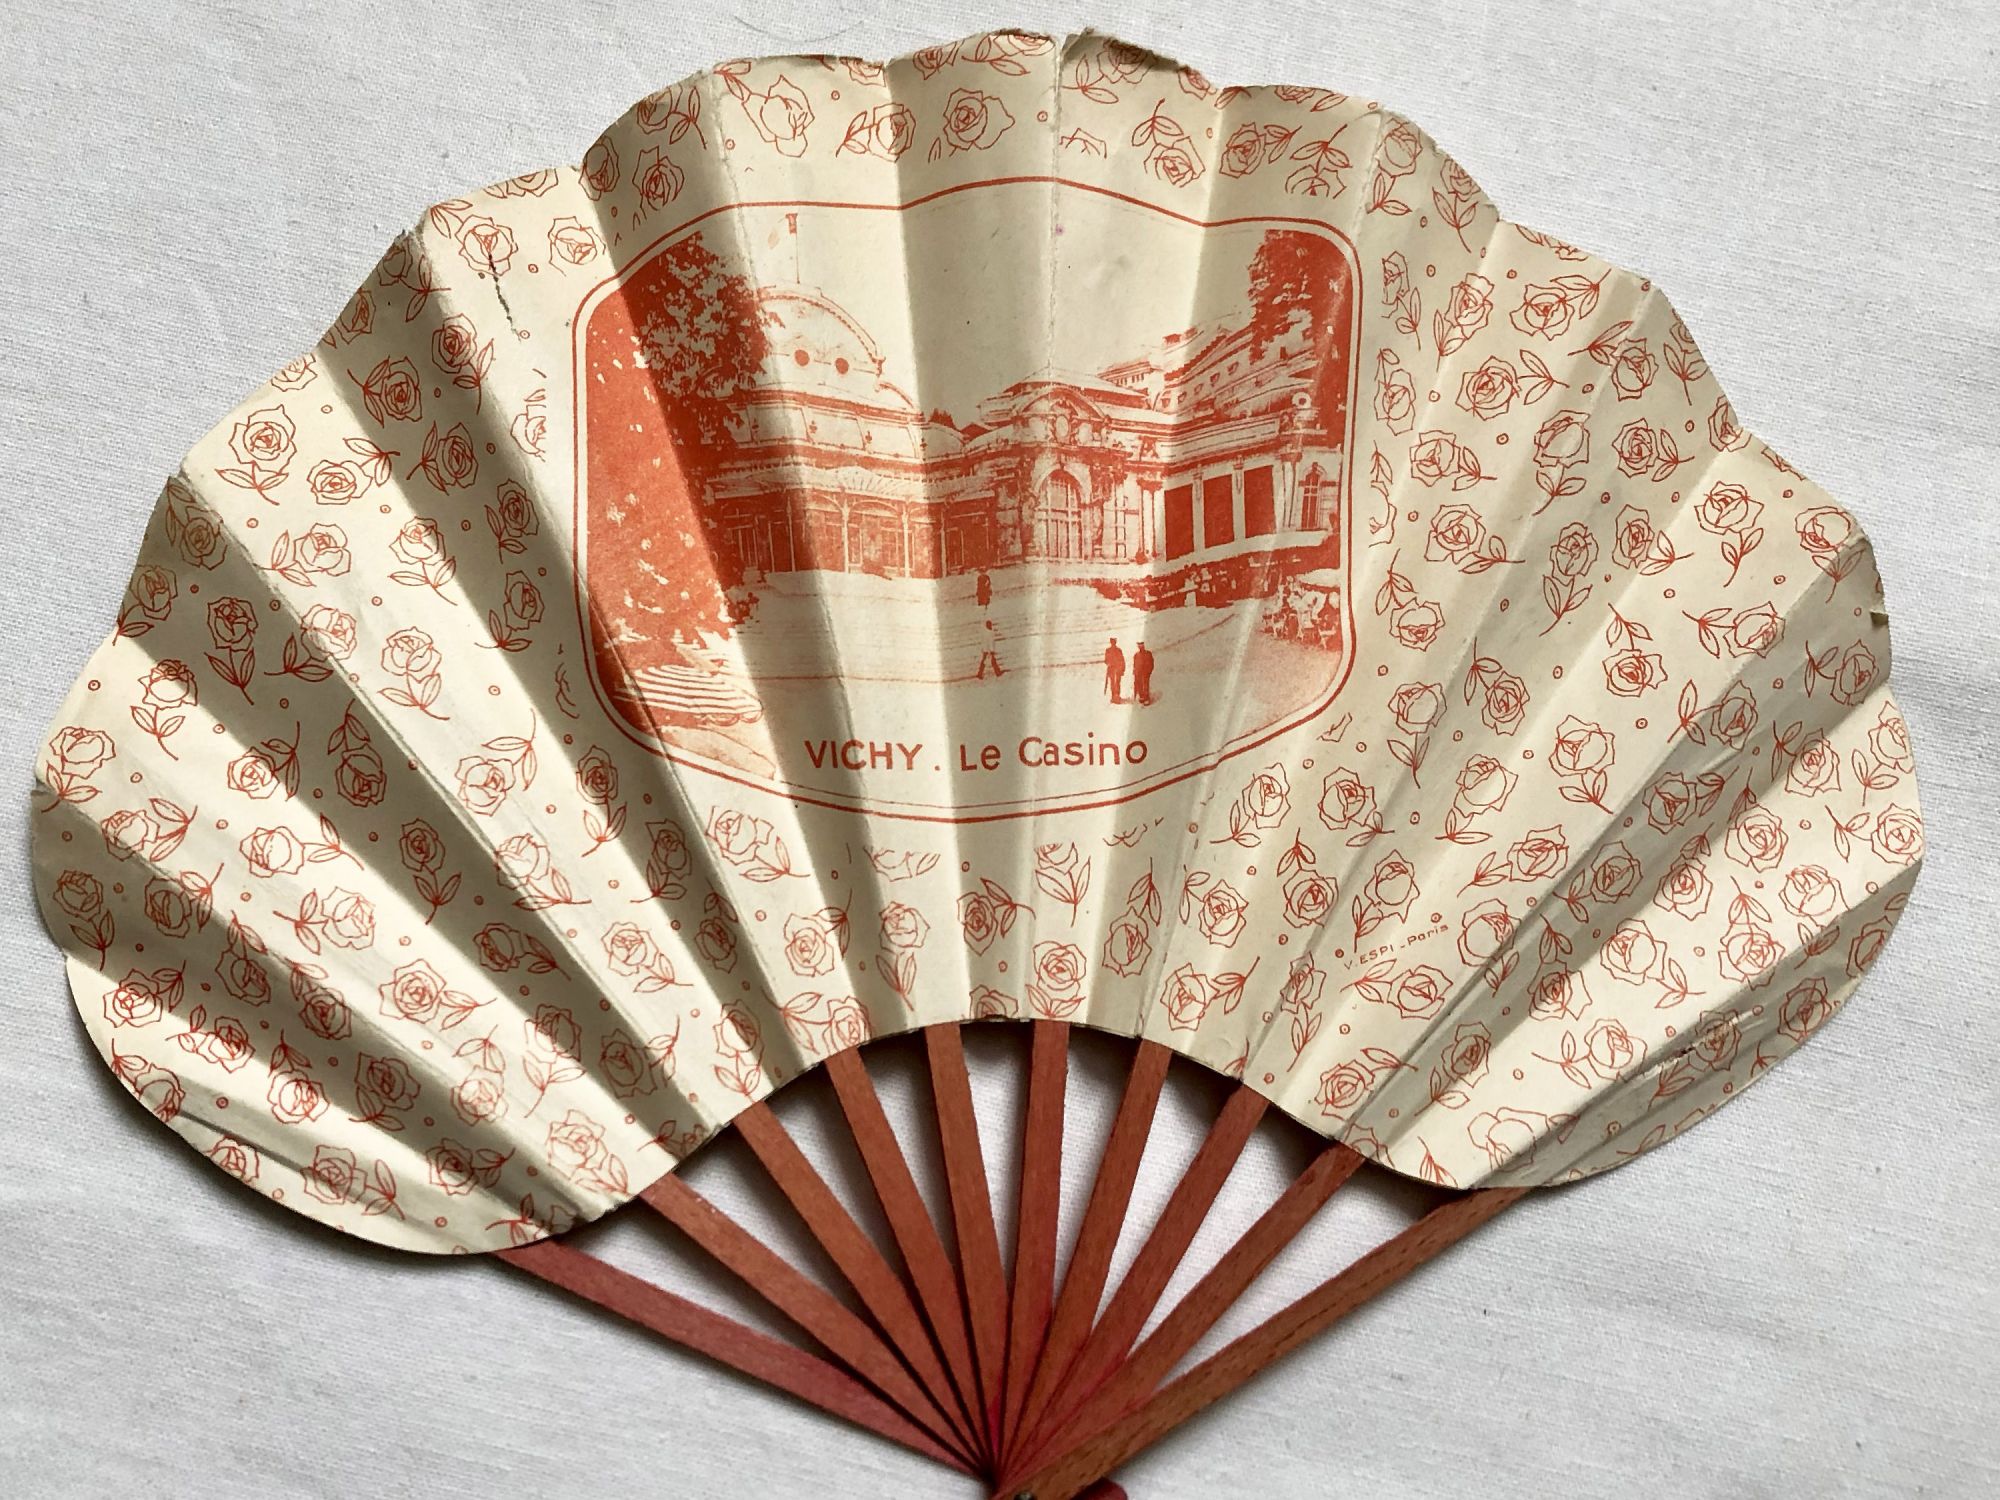 Hand fan from the Vichy city Casino in paper and wood - Designed by the French fan maker ESPI from Paris